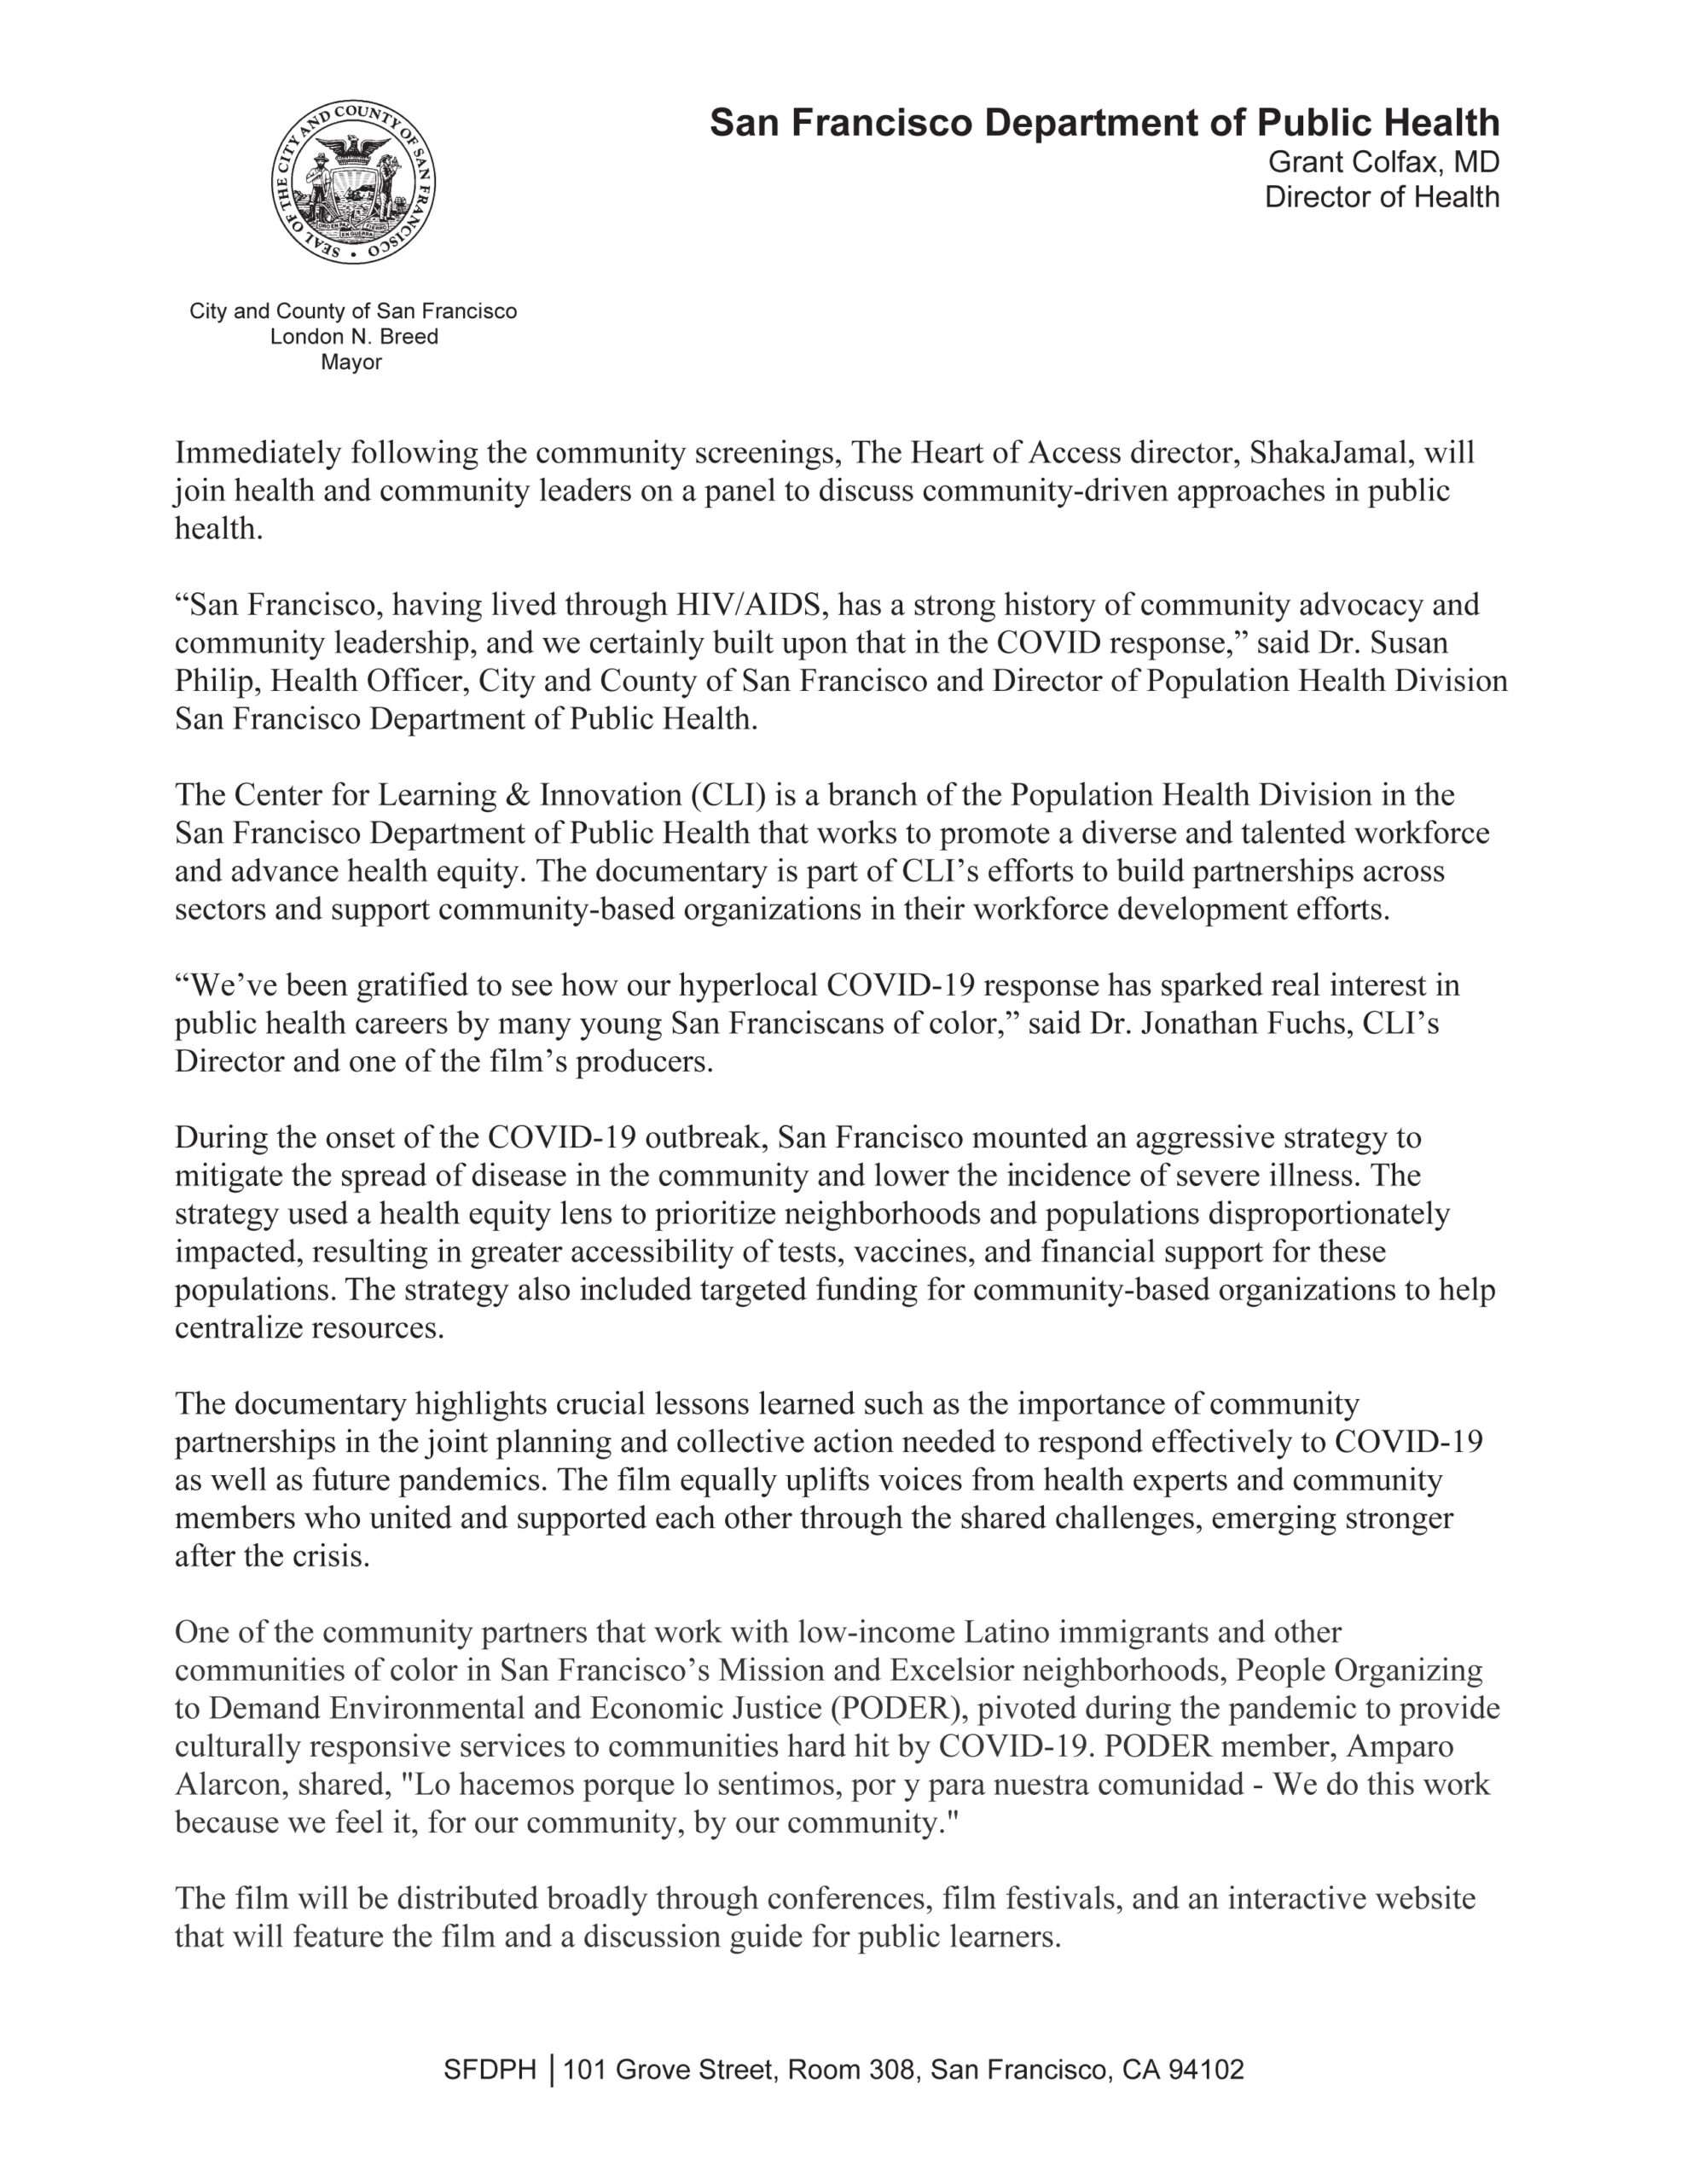 Heart of Access Press Release Page 2